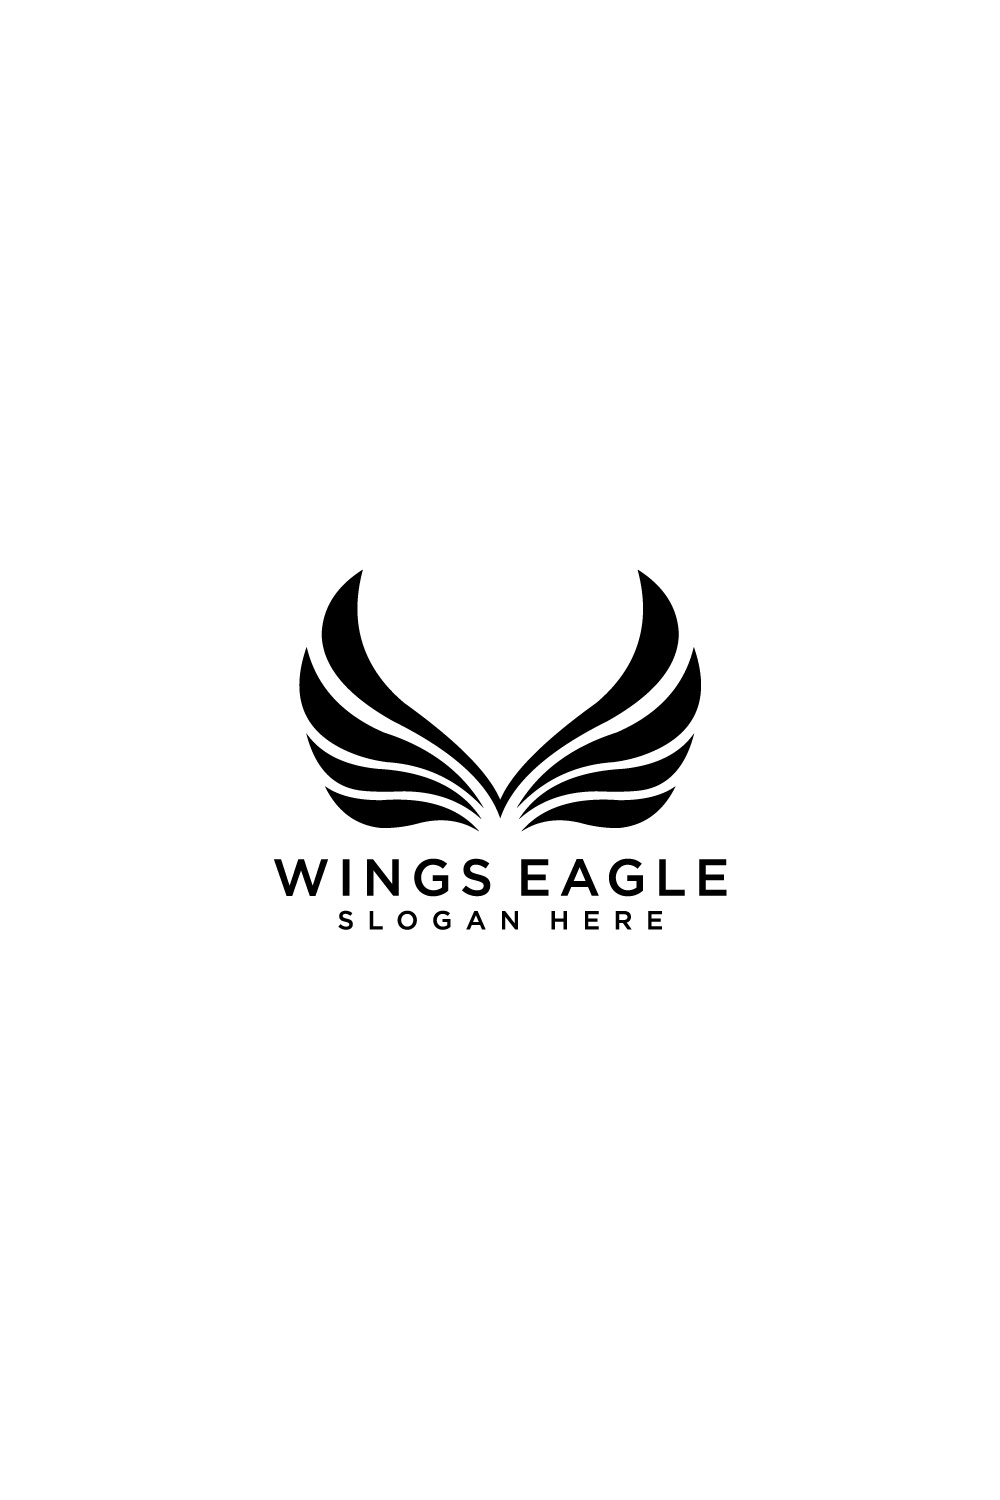 wings eagle logo pinterest preview image.